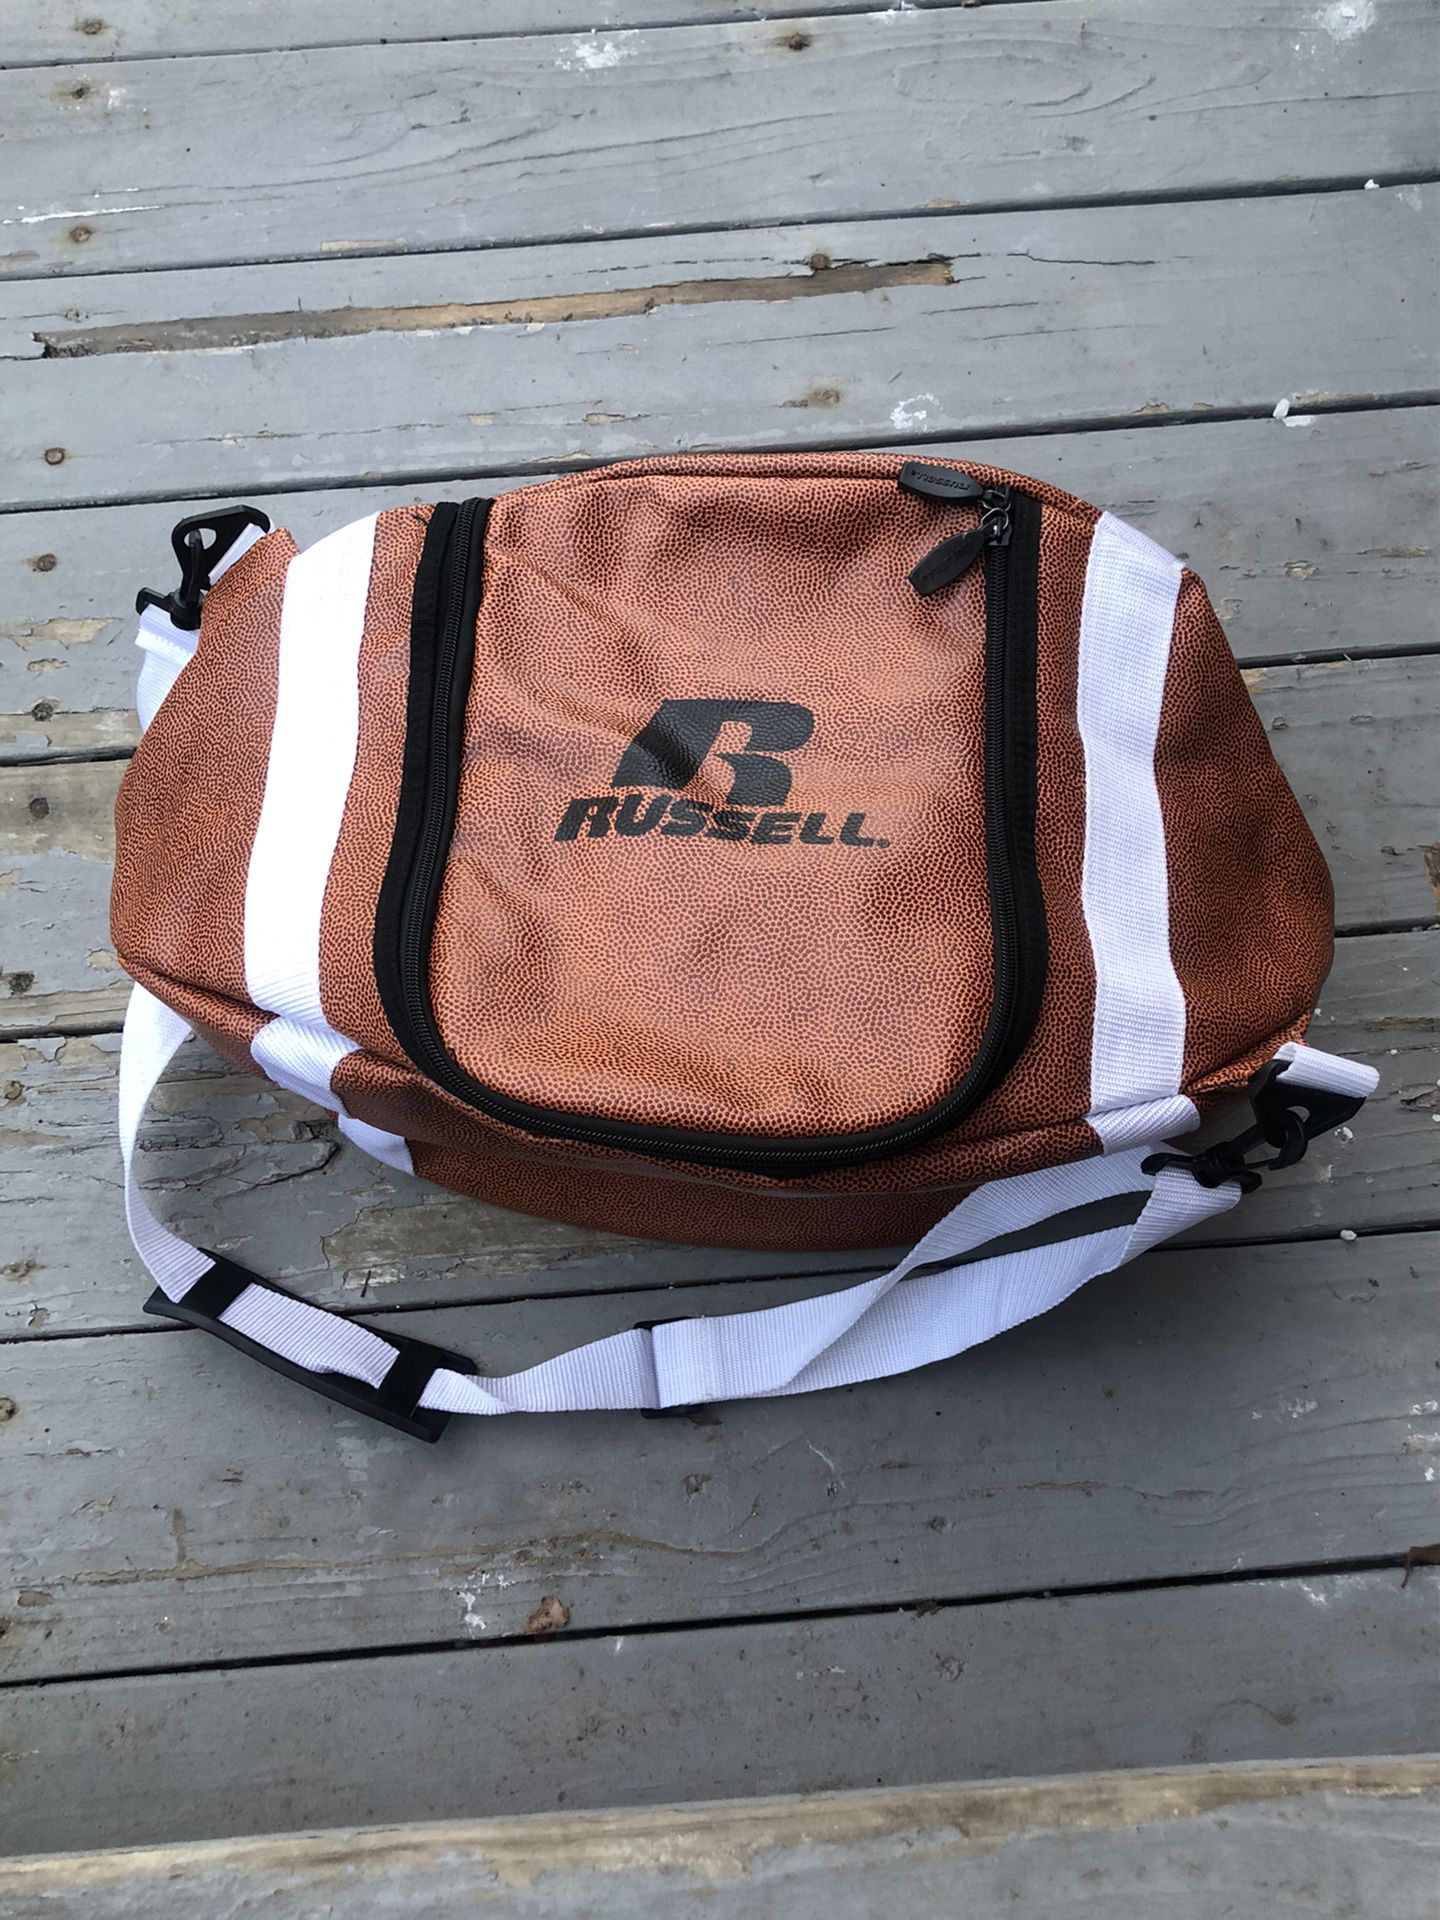 Russsell Duffle Bag